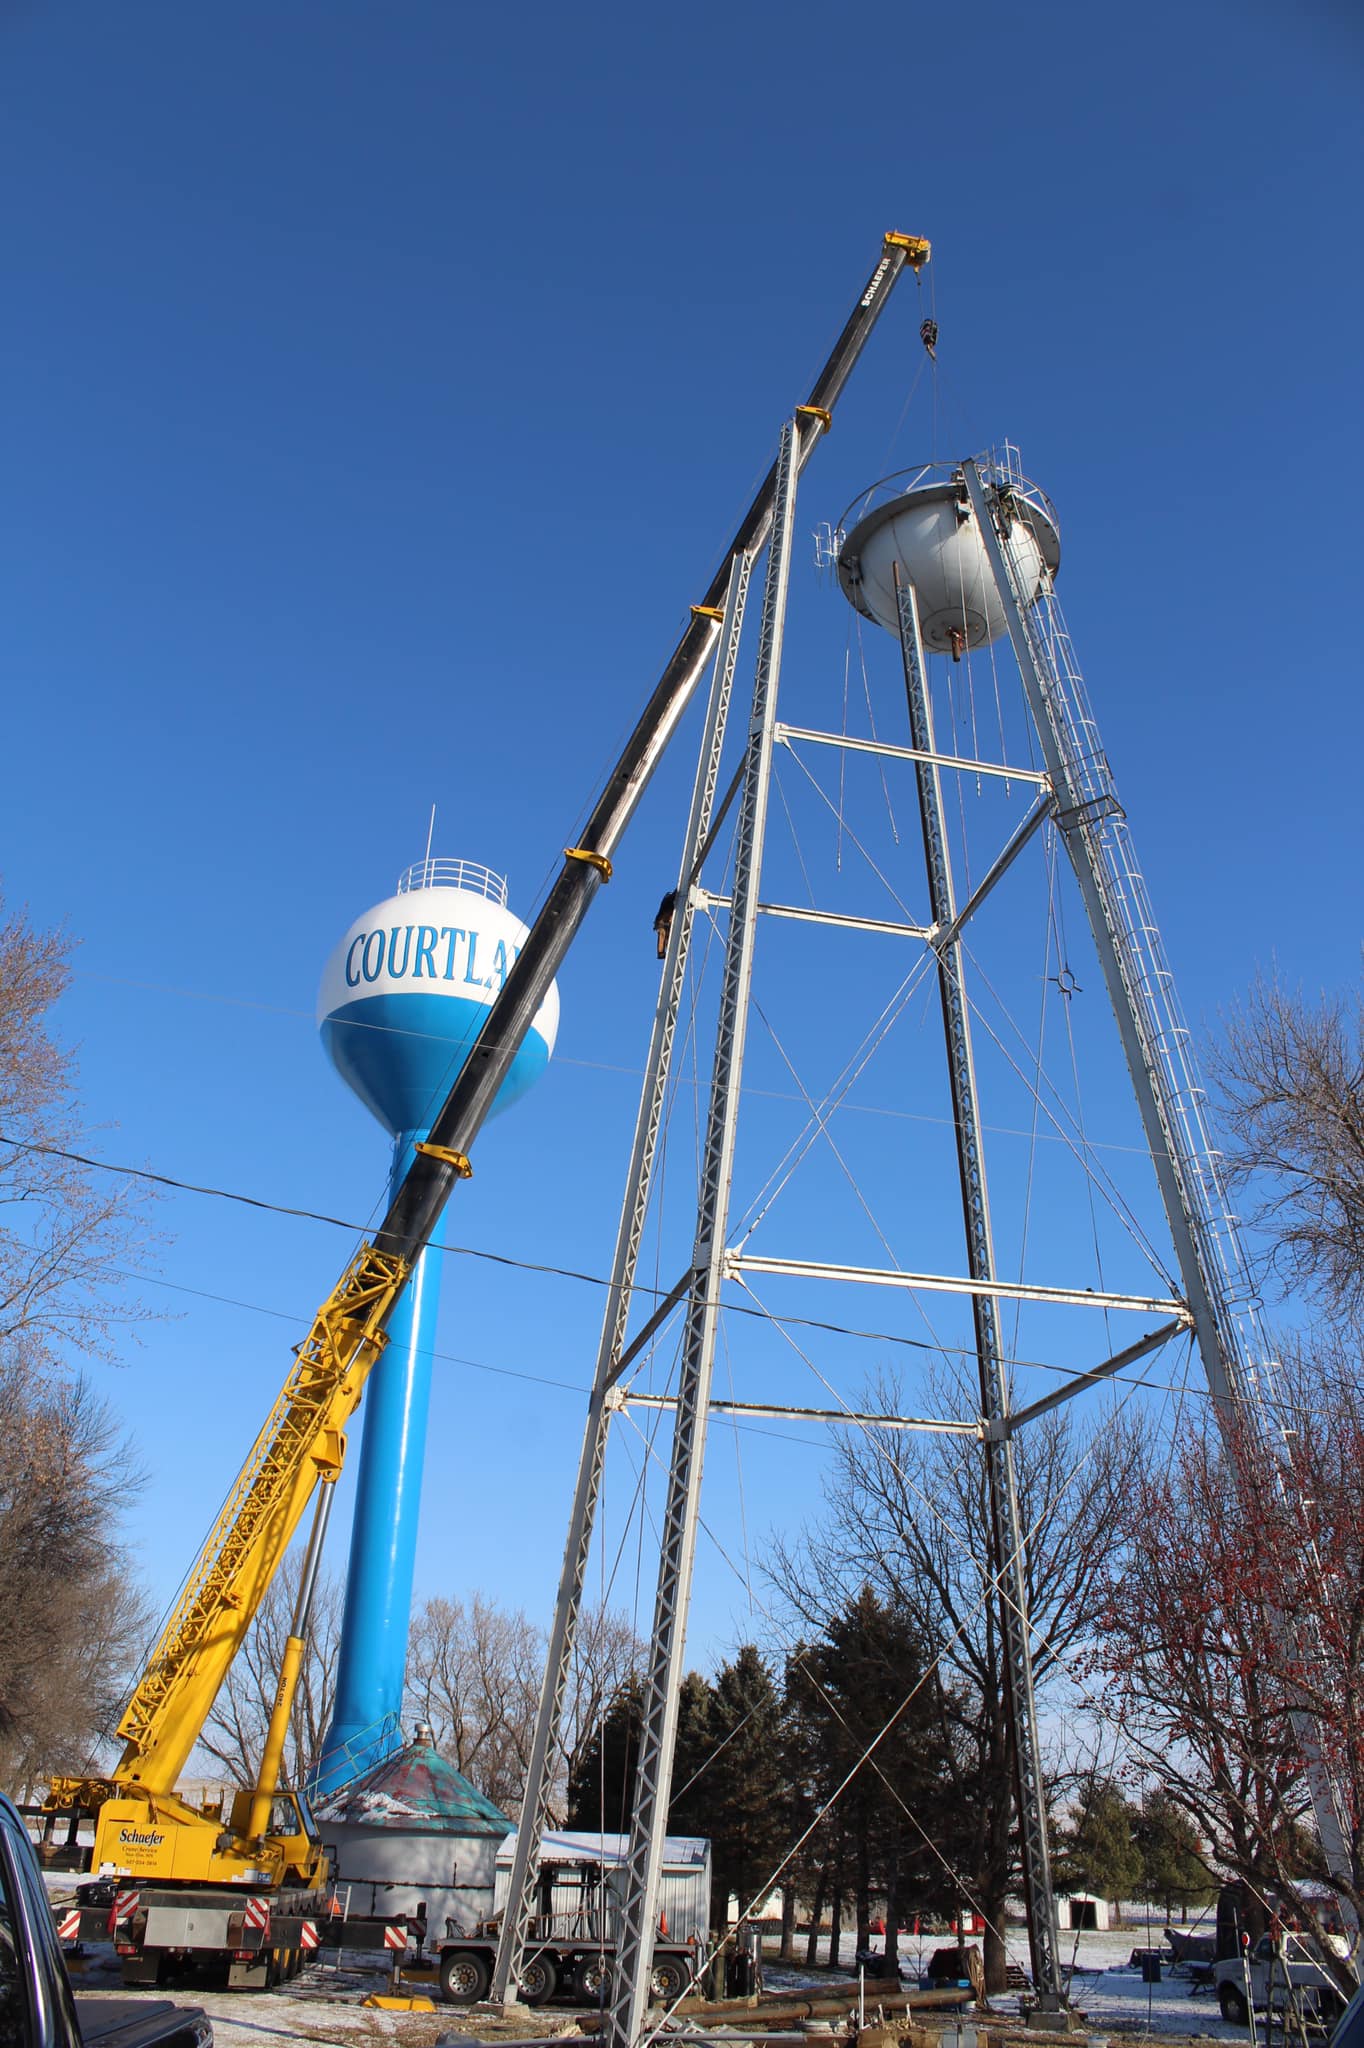 Courtland water towers by Tiffany Hoffmann of the city of Courtland